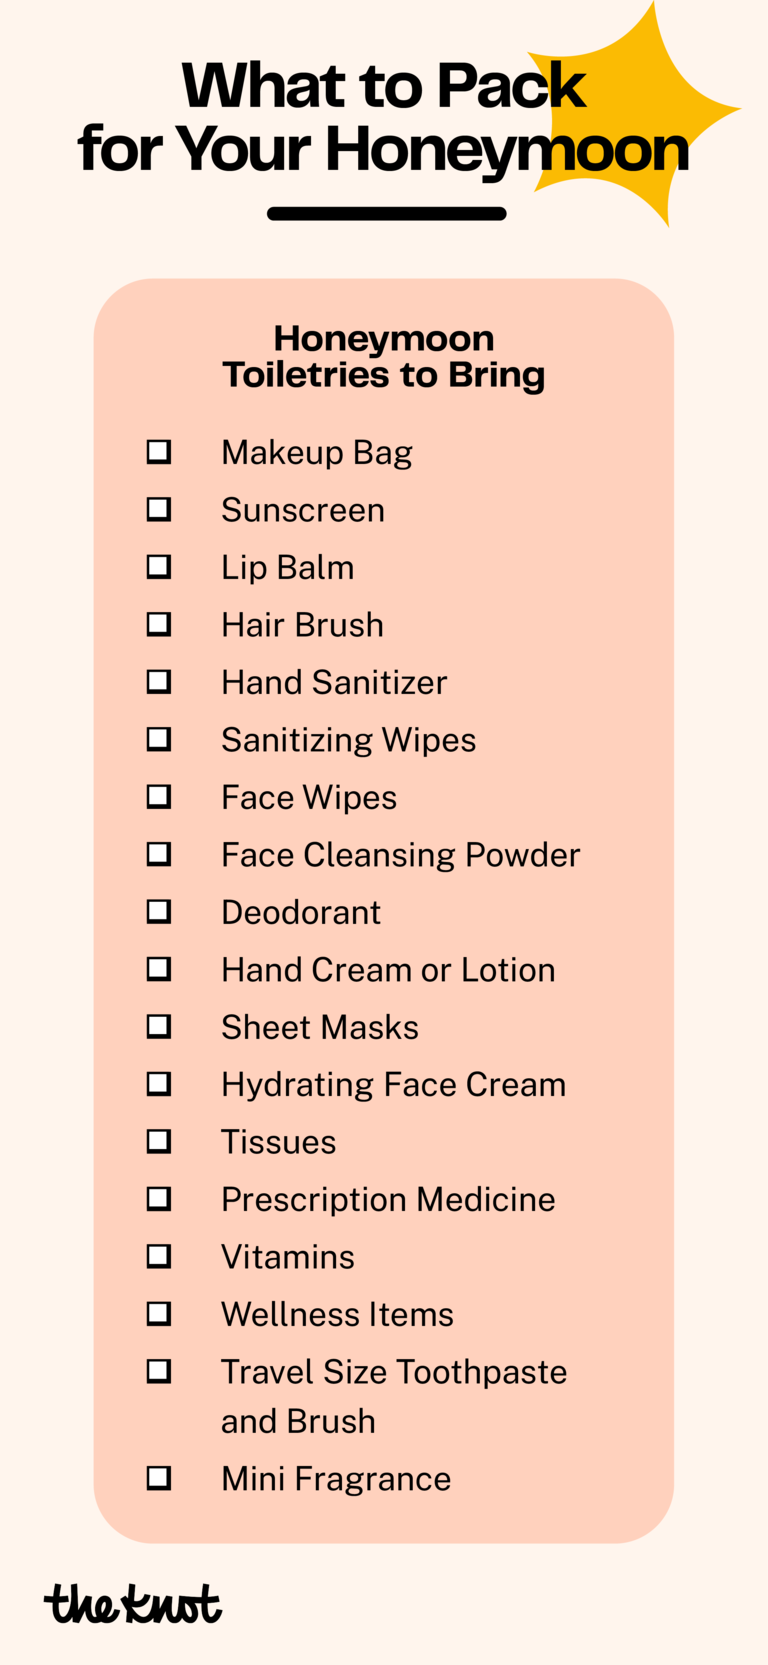 Checklist of what toiletries to bring on your honeymoon